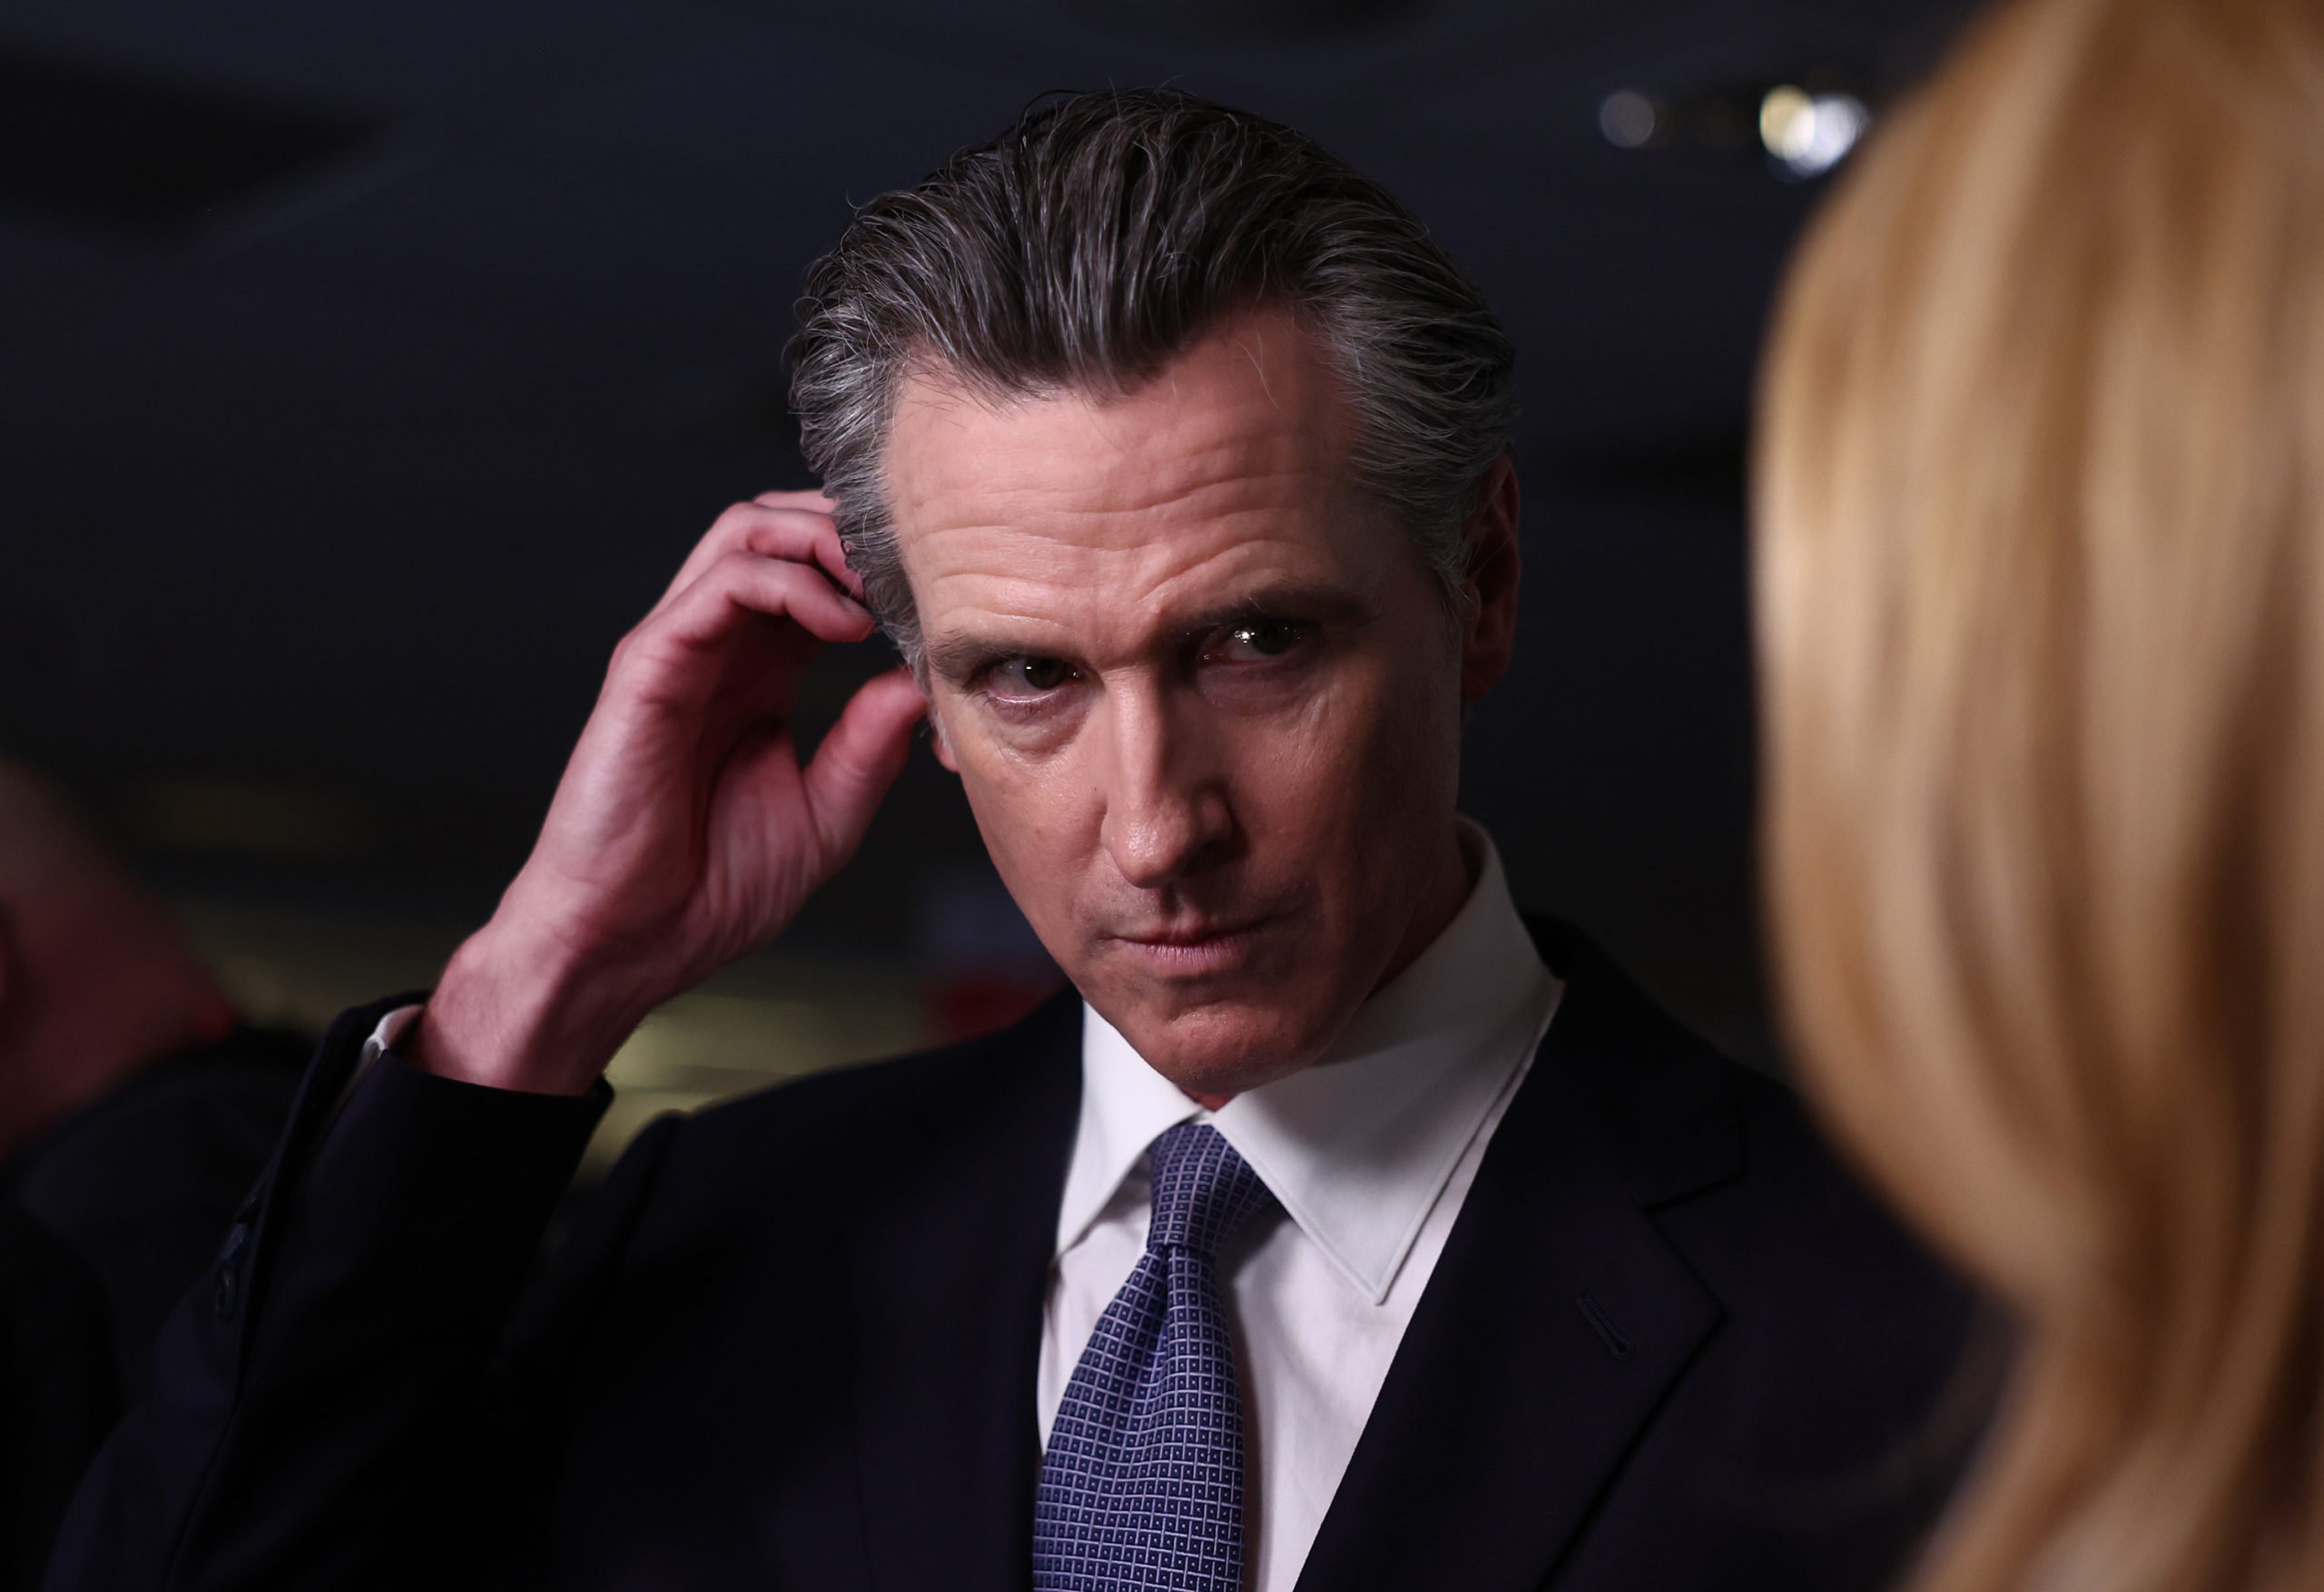 SIMI VALLEY, CALIFORNIA - SEPTEMBER 27: California Gov. Gavin Newsom talks to reporters in the spin room following the FOX Business Republican Primary Debate at the Ronald Reagan Presidential Library on September 27, 2023 in Simi Valley, California. Seven presidential hopefuls squared off in the second Republican primary debate as former U.S. President Donald Trump, currently facing indictments in four locations, declined again to participate. (Photo by Mario Tama/Getty Images)